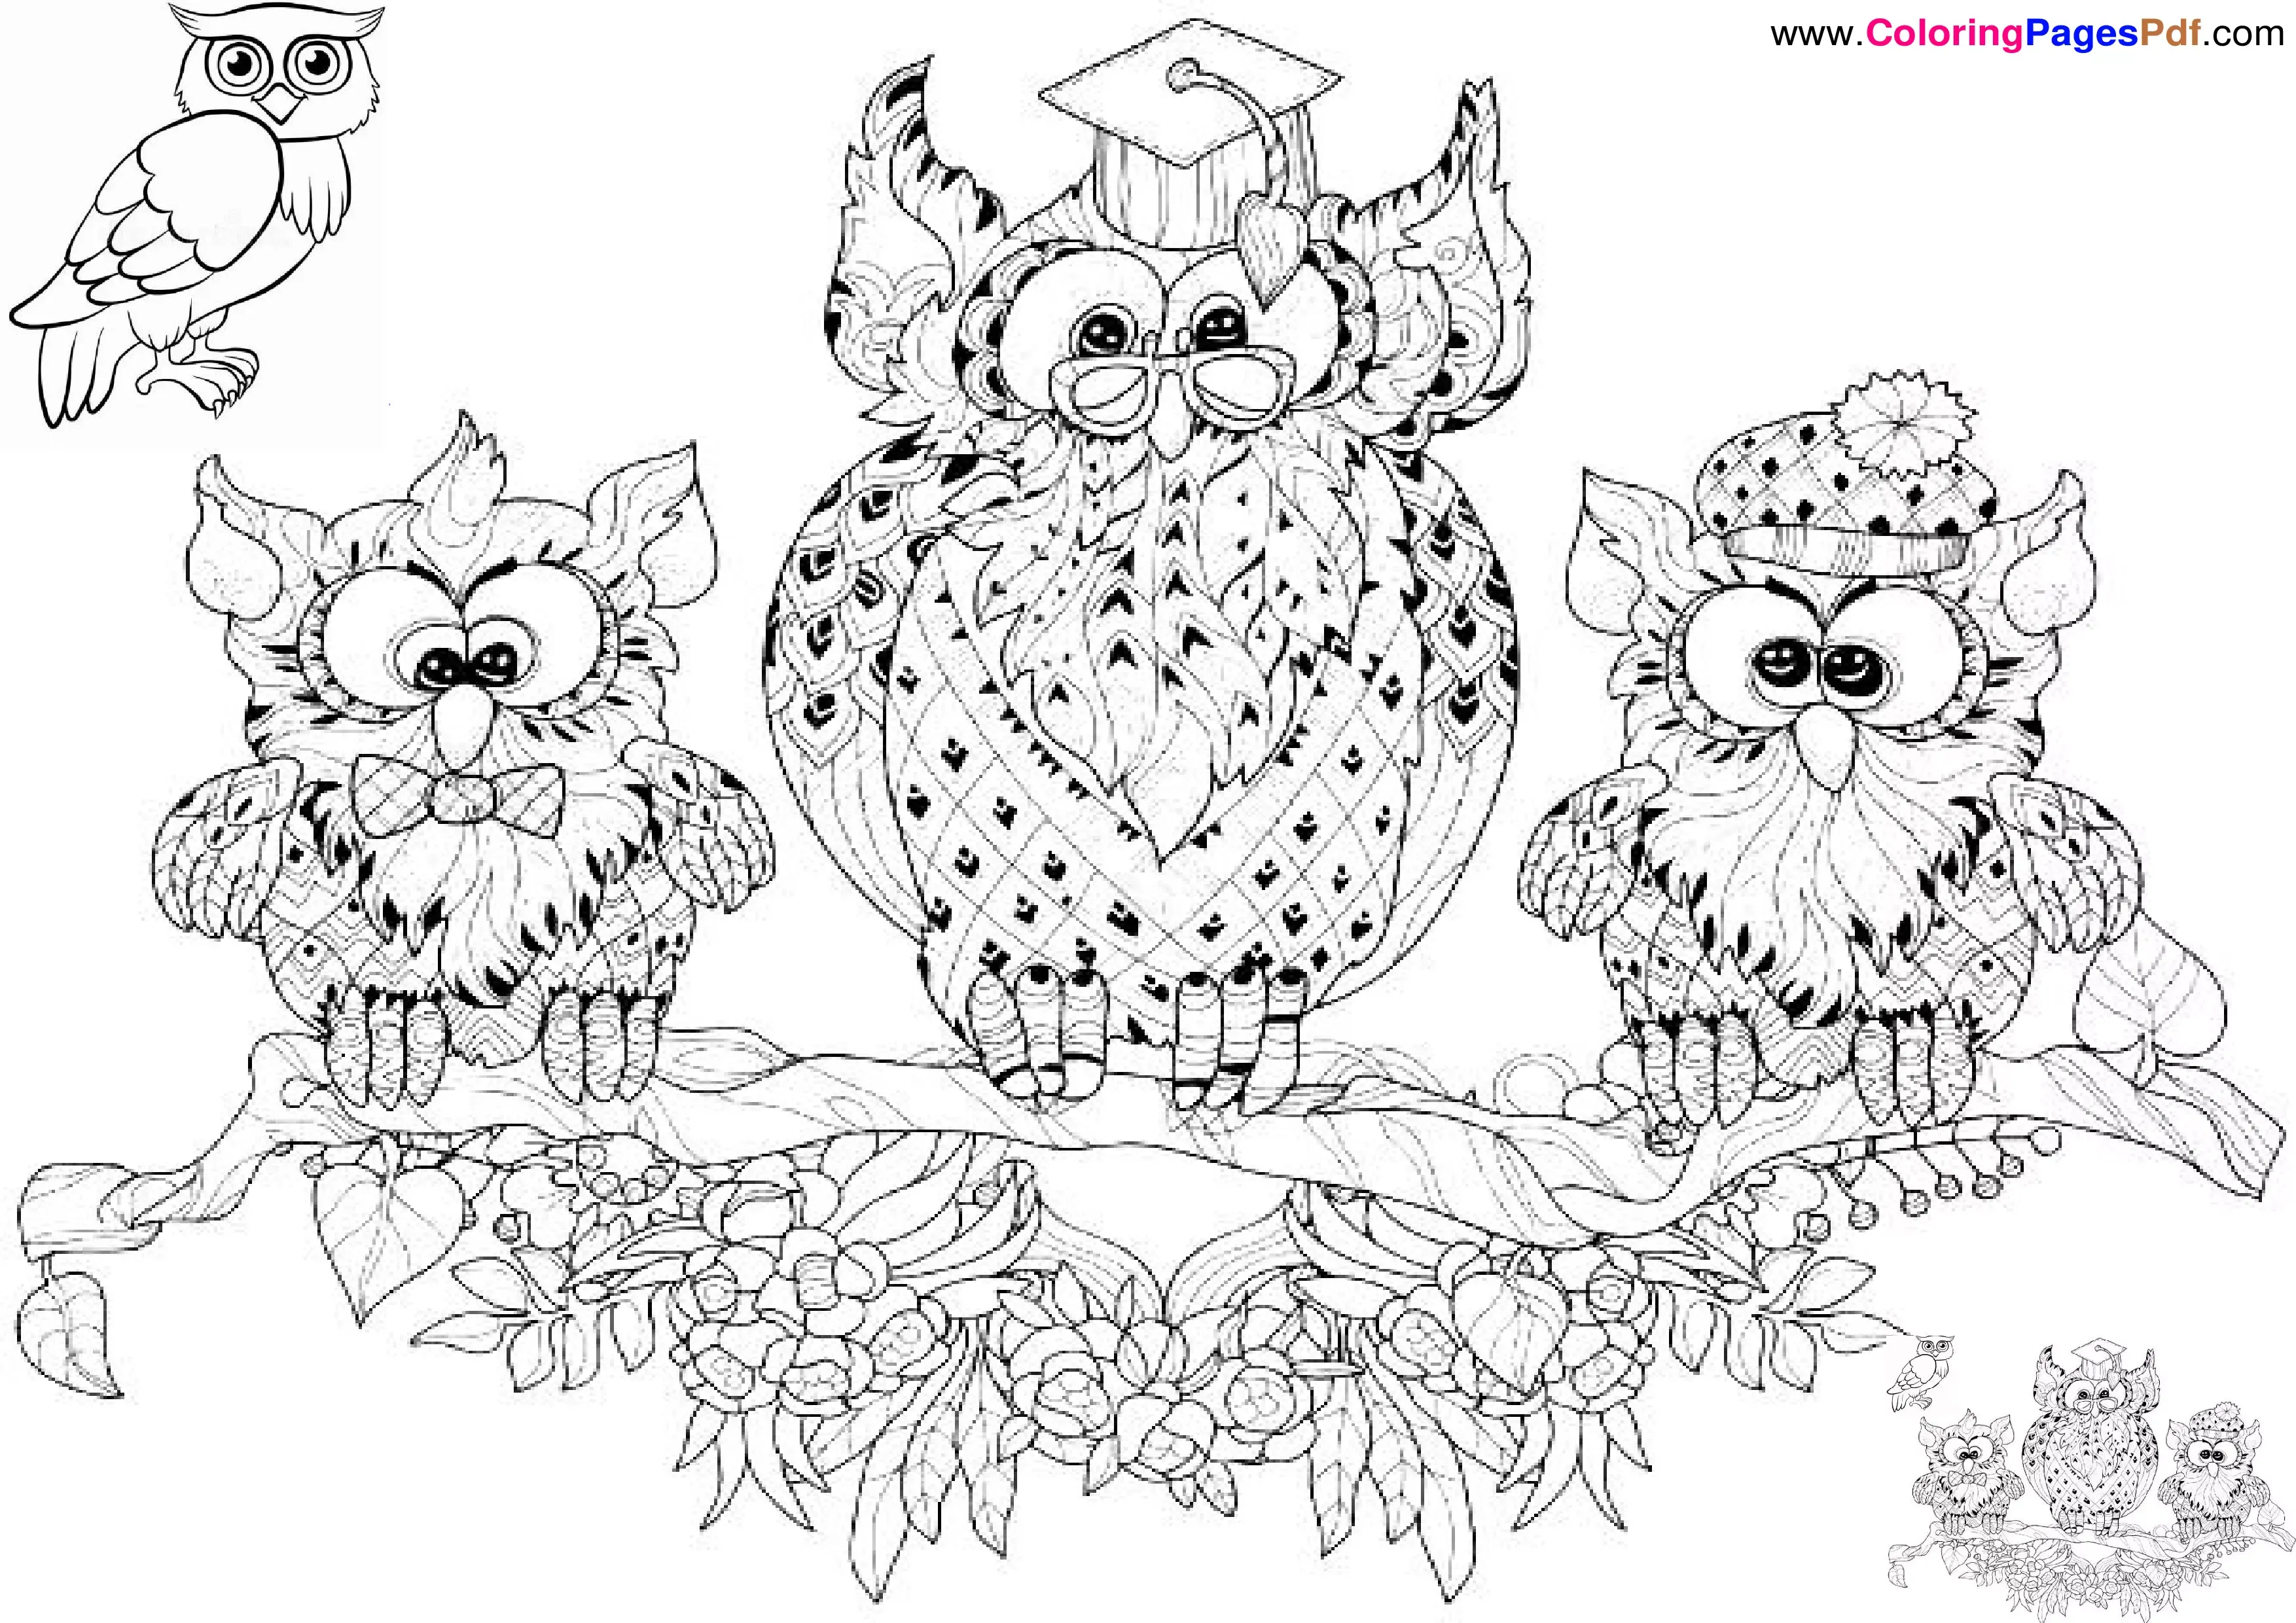 Owl coloring pages for adults